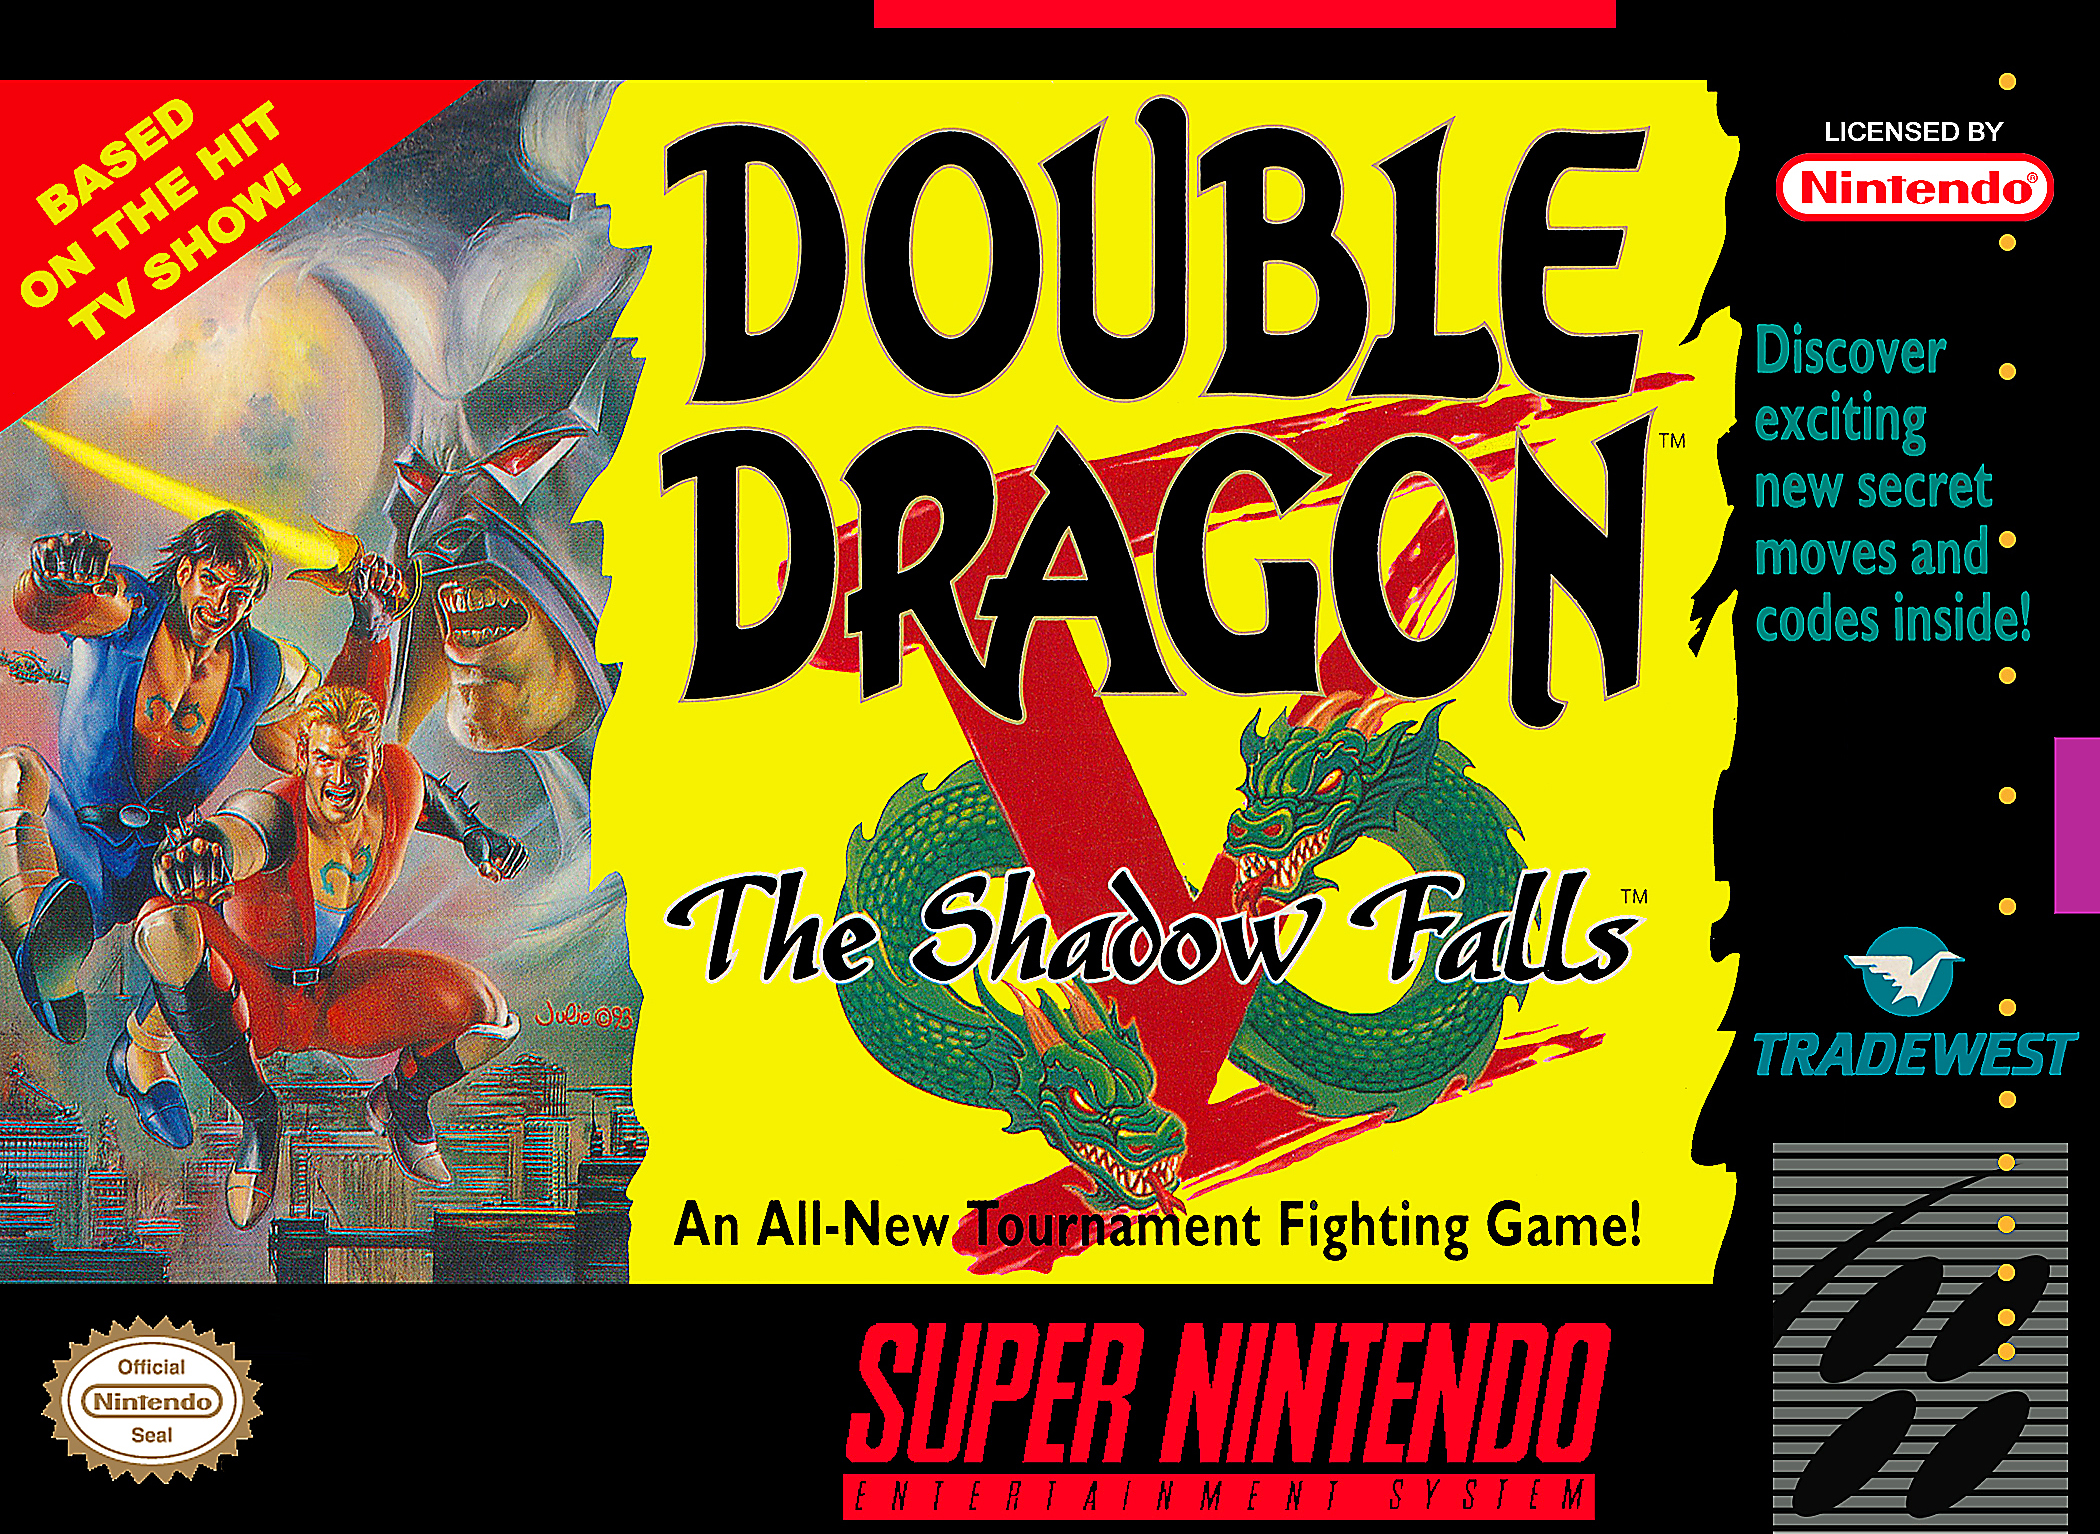 Double Dragon - Mission 4 Nintendo NES Background Only Map